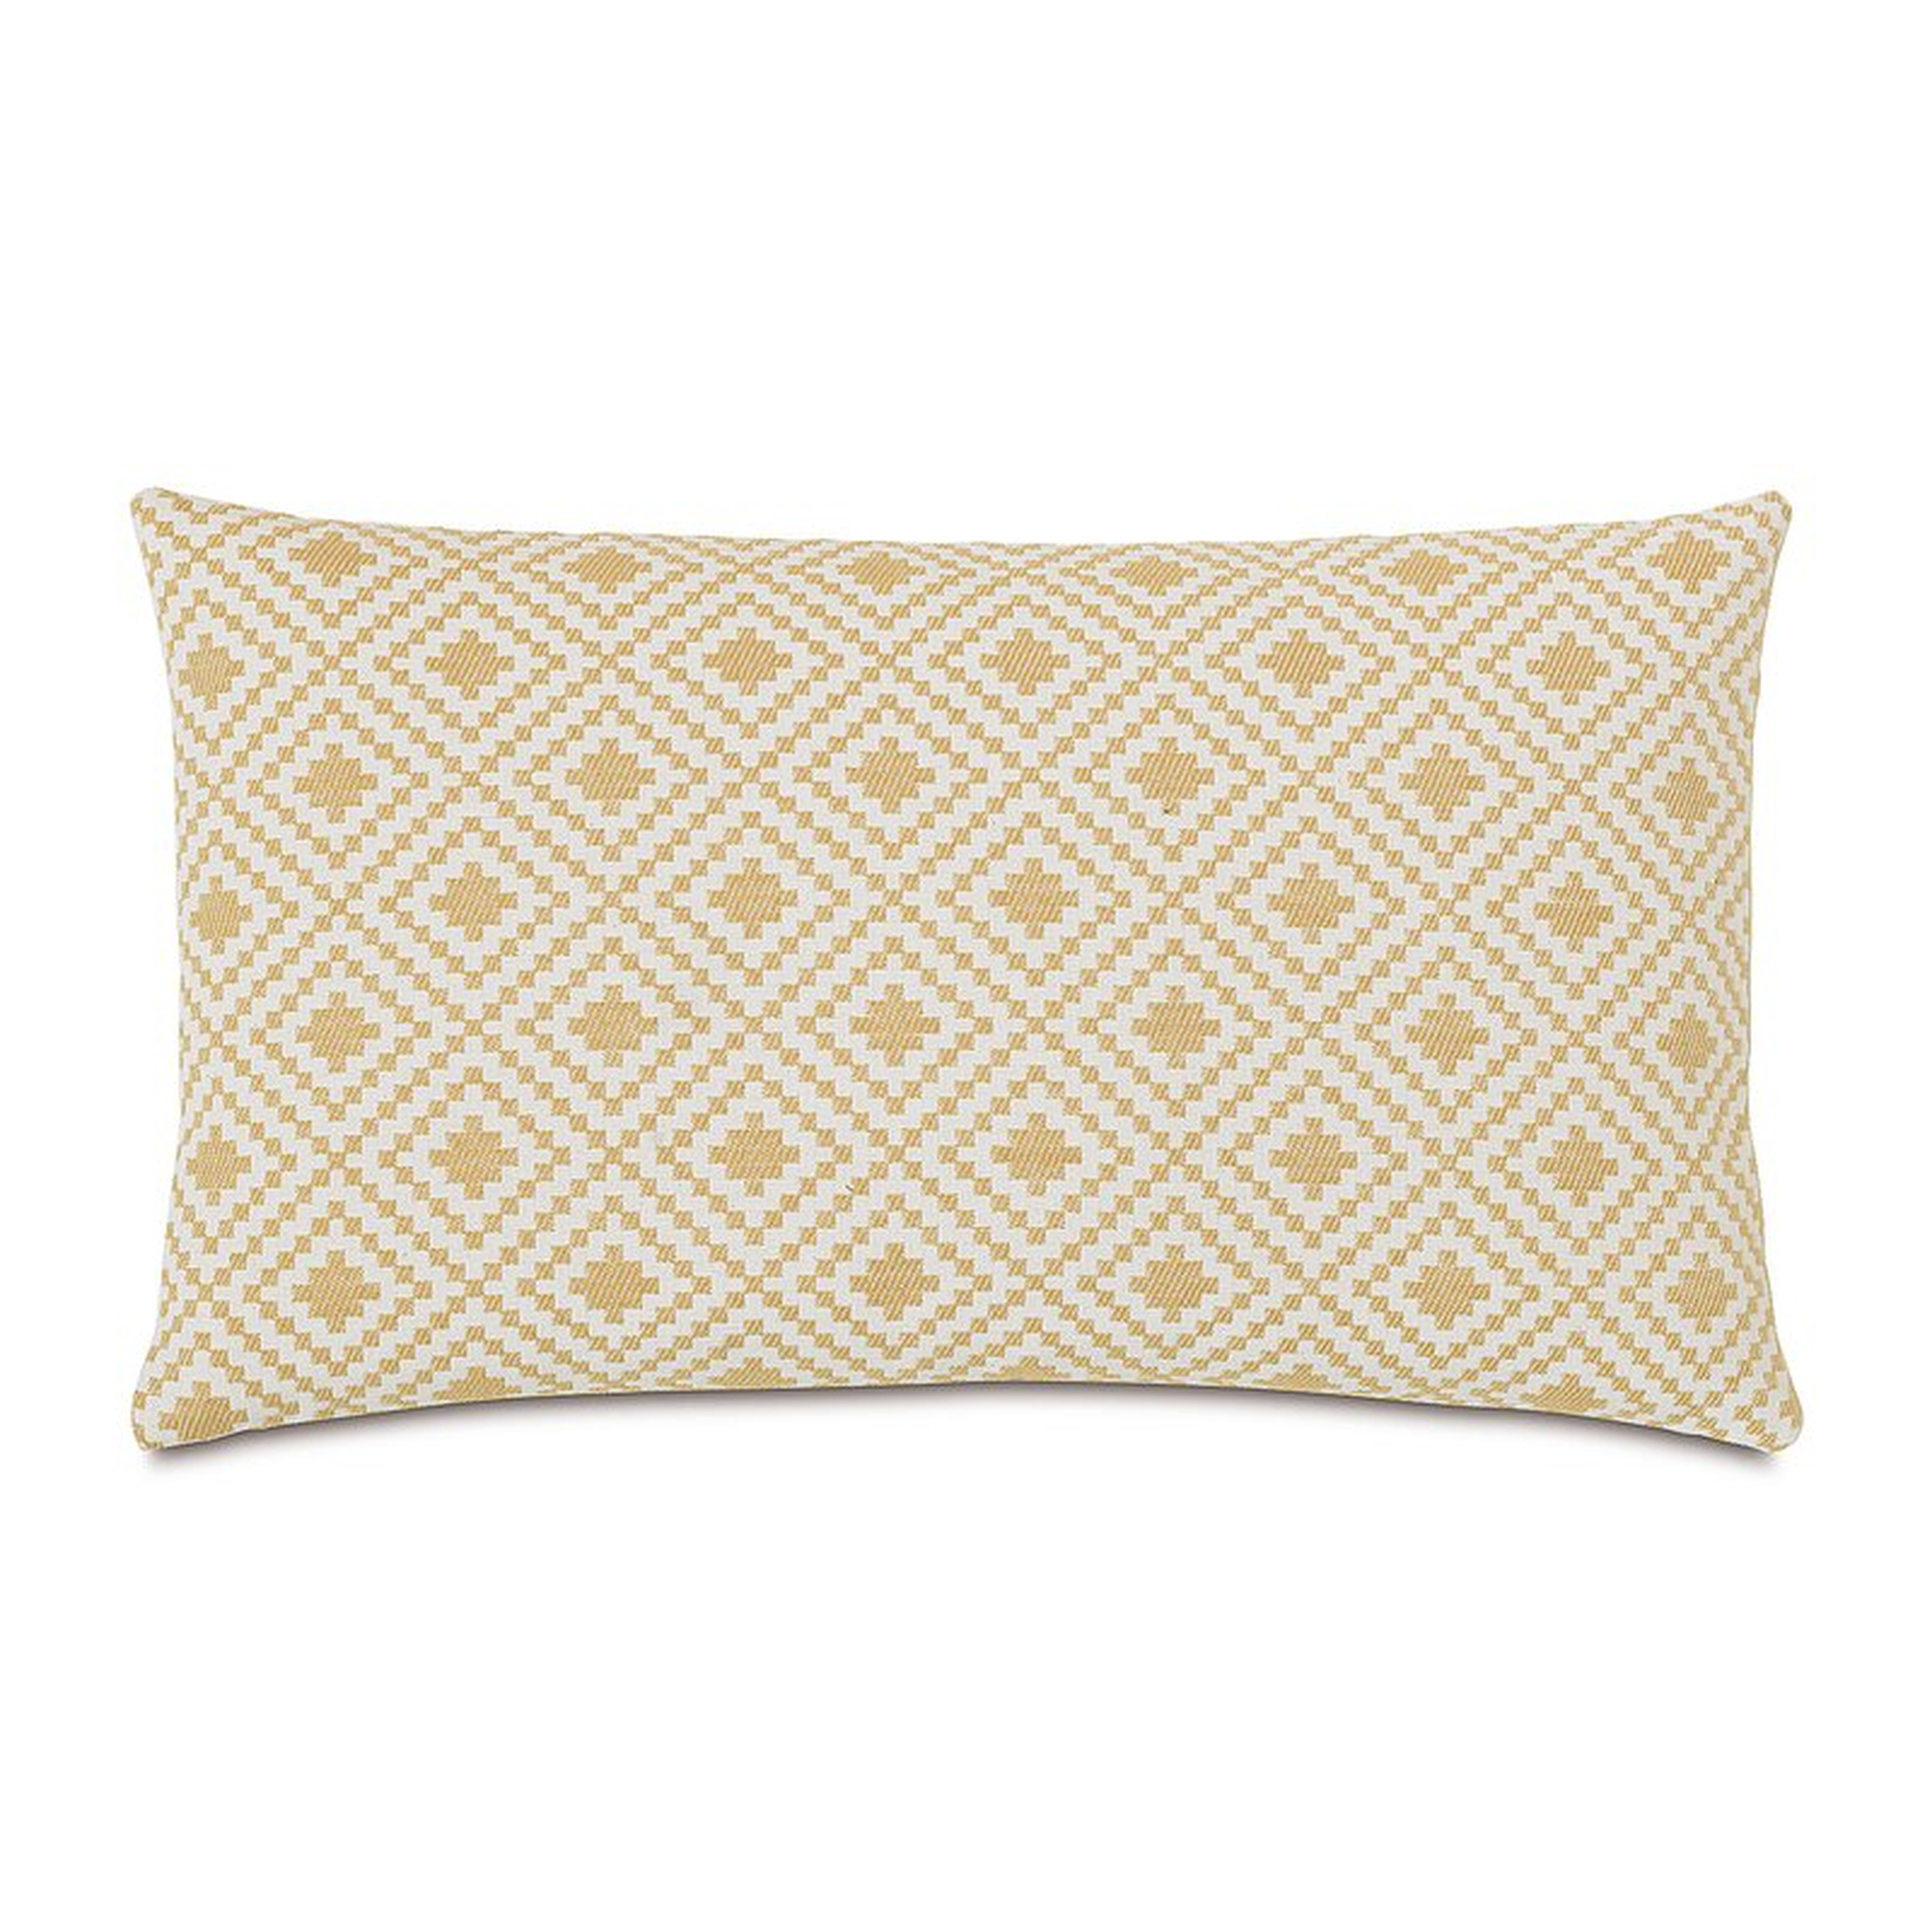 Eastern Accents Downey Cyrus Straw Lumbar Pillow Cover & Insert - Perigold